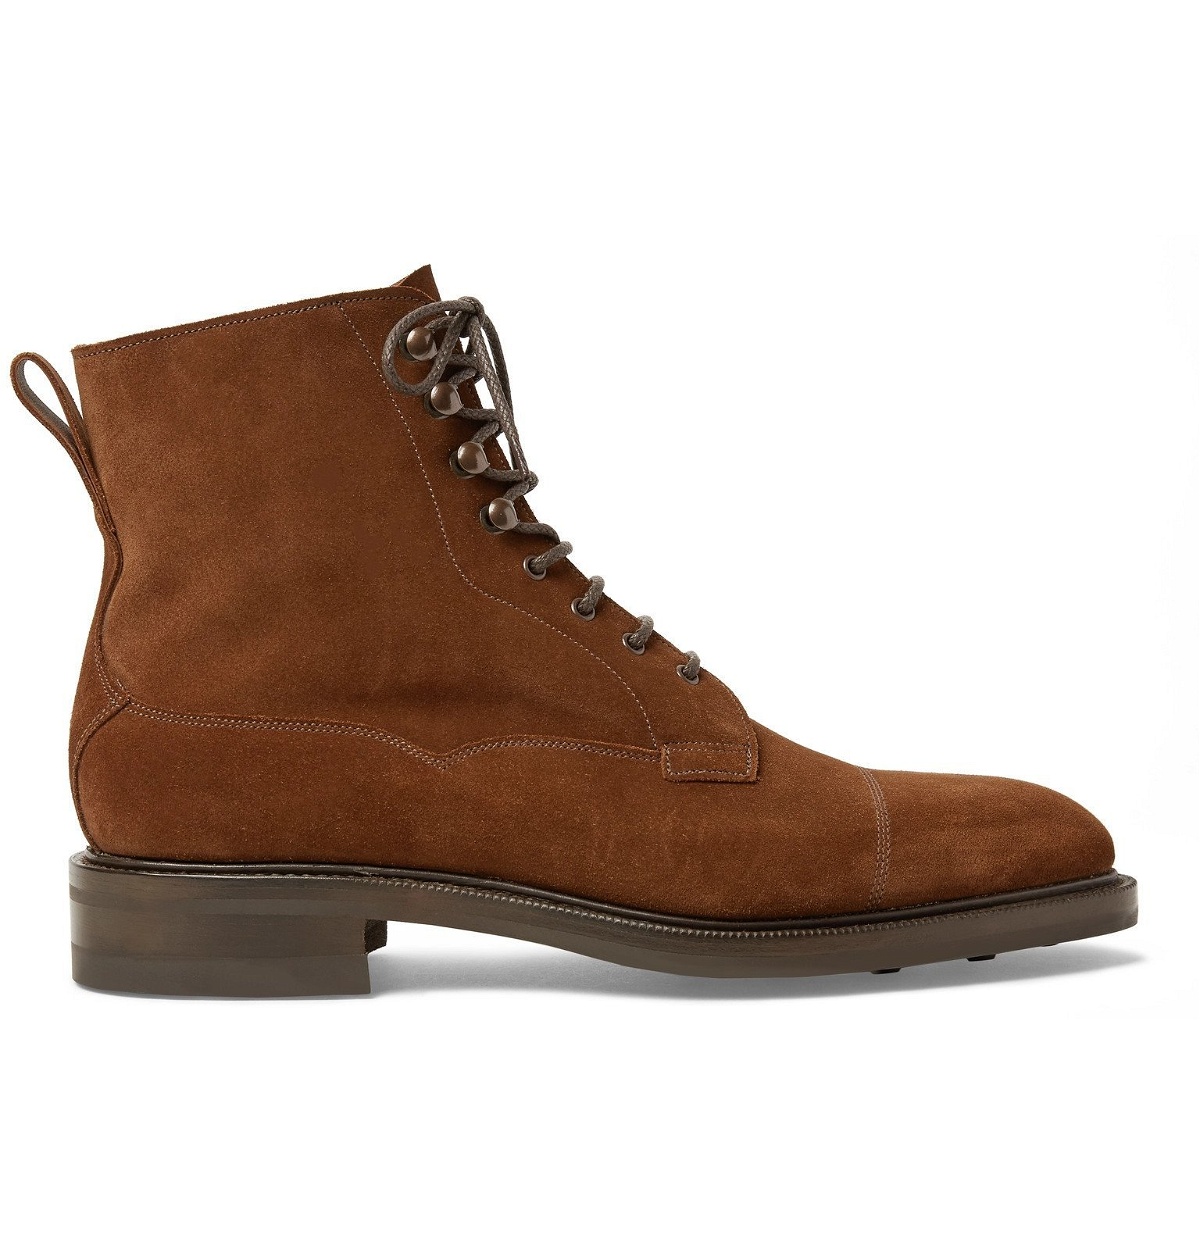 Edward Green - Galway Cap-Toe Suede Boots - Brown Edward Green